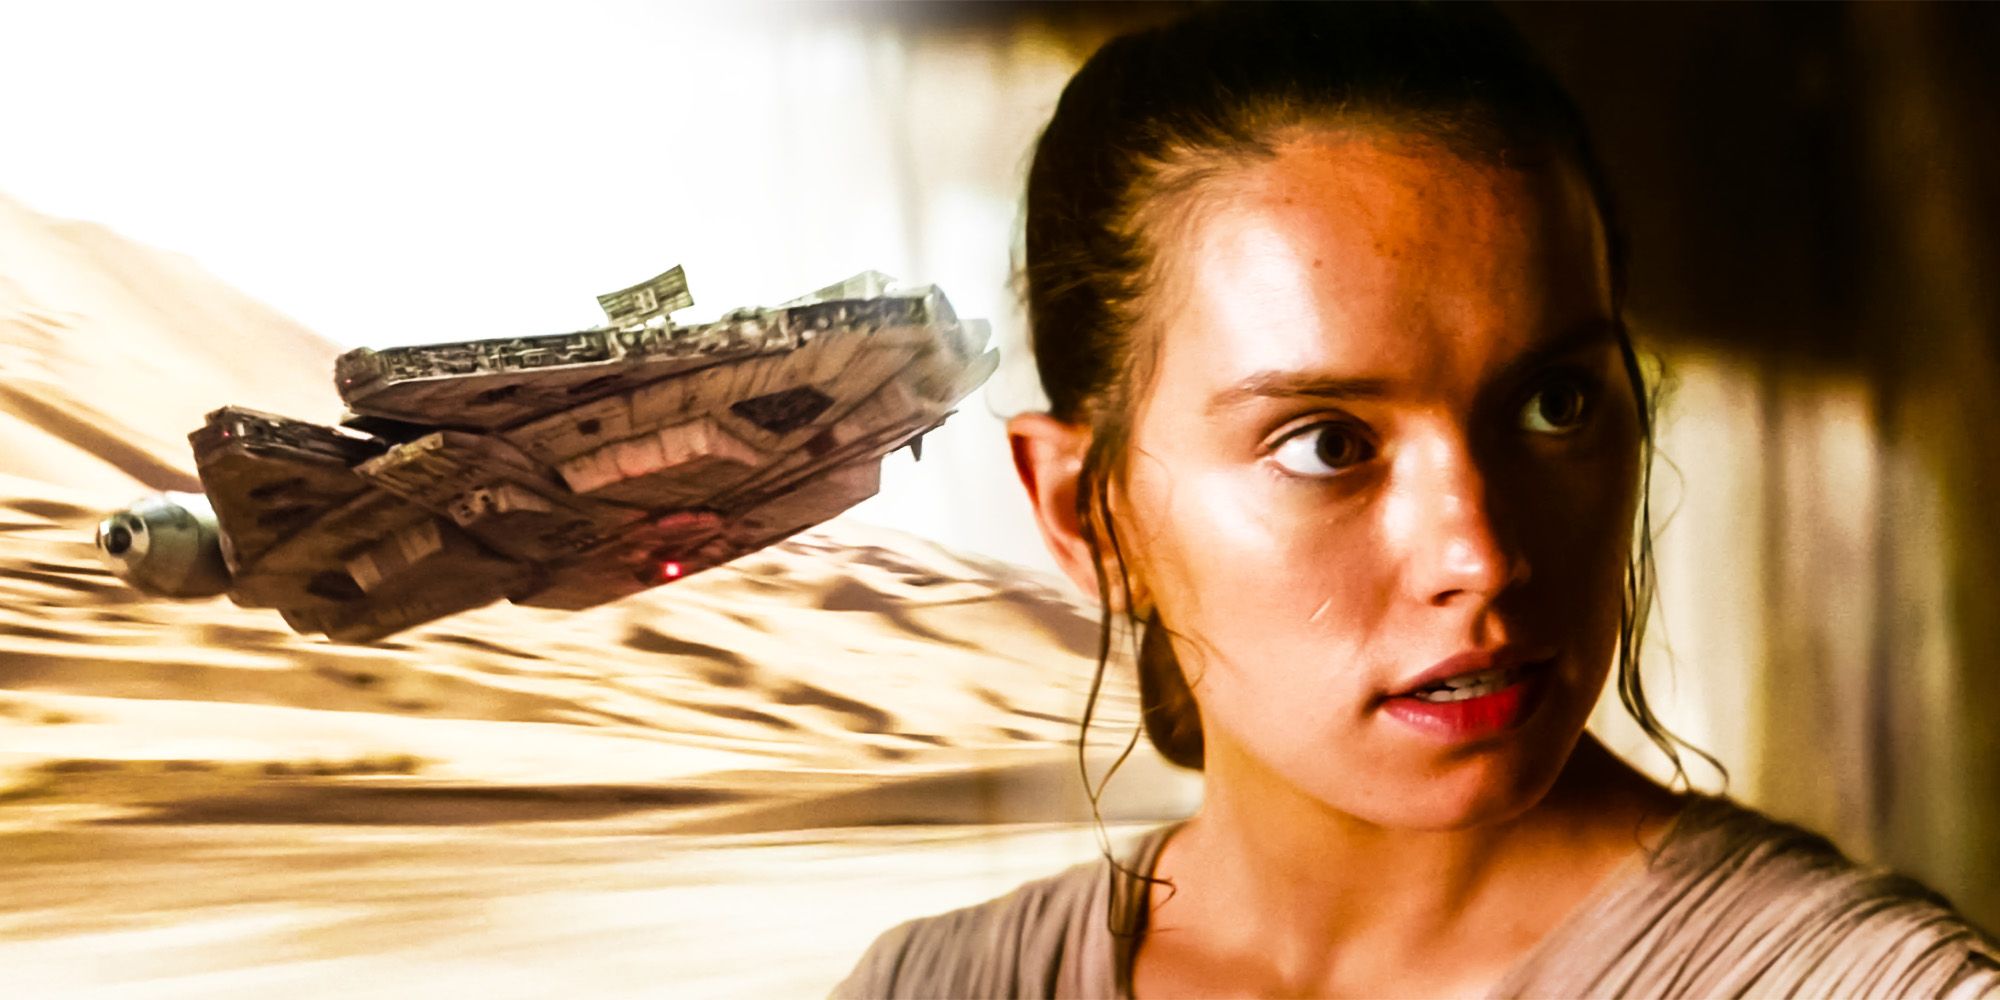 rey's star wars: the force awakens pilot sklls were always perfectly explained and fit star wars canon